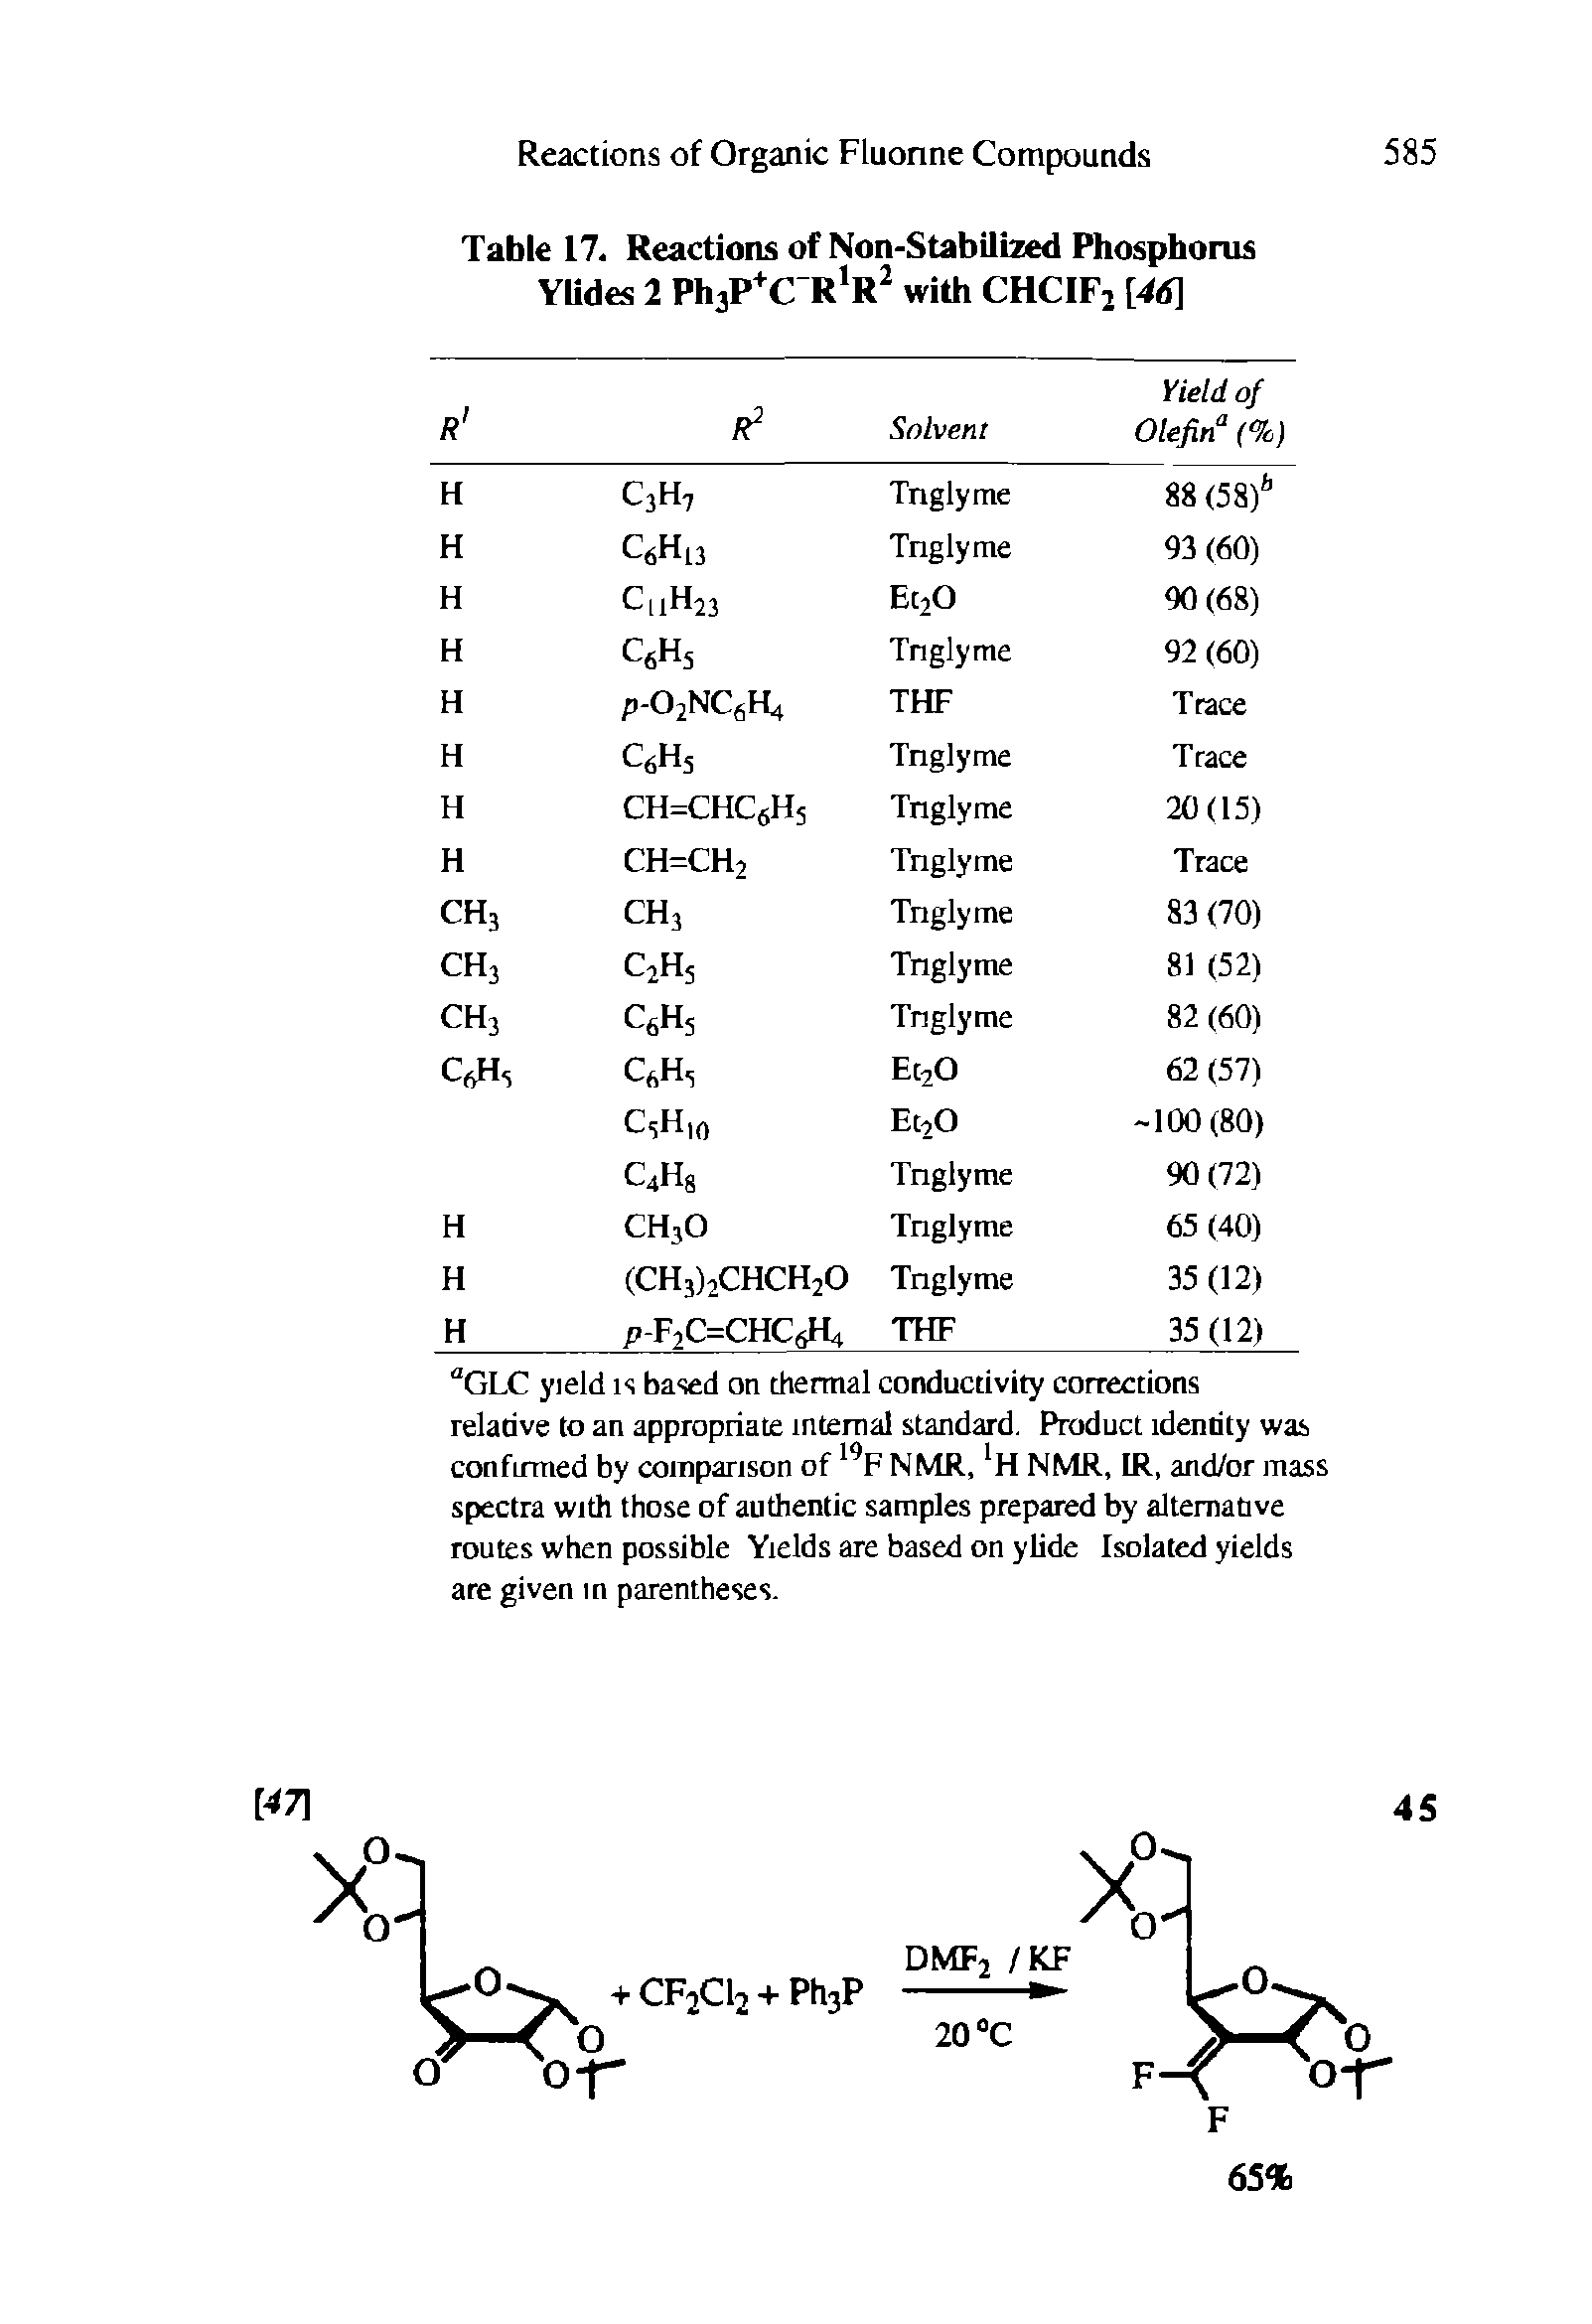 Table 17. Reactions of Non-Stabilized Phosphorus Ylides 2 PhjP C with CHCIFi [46]...